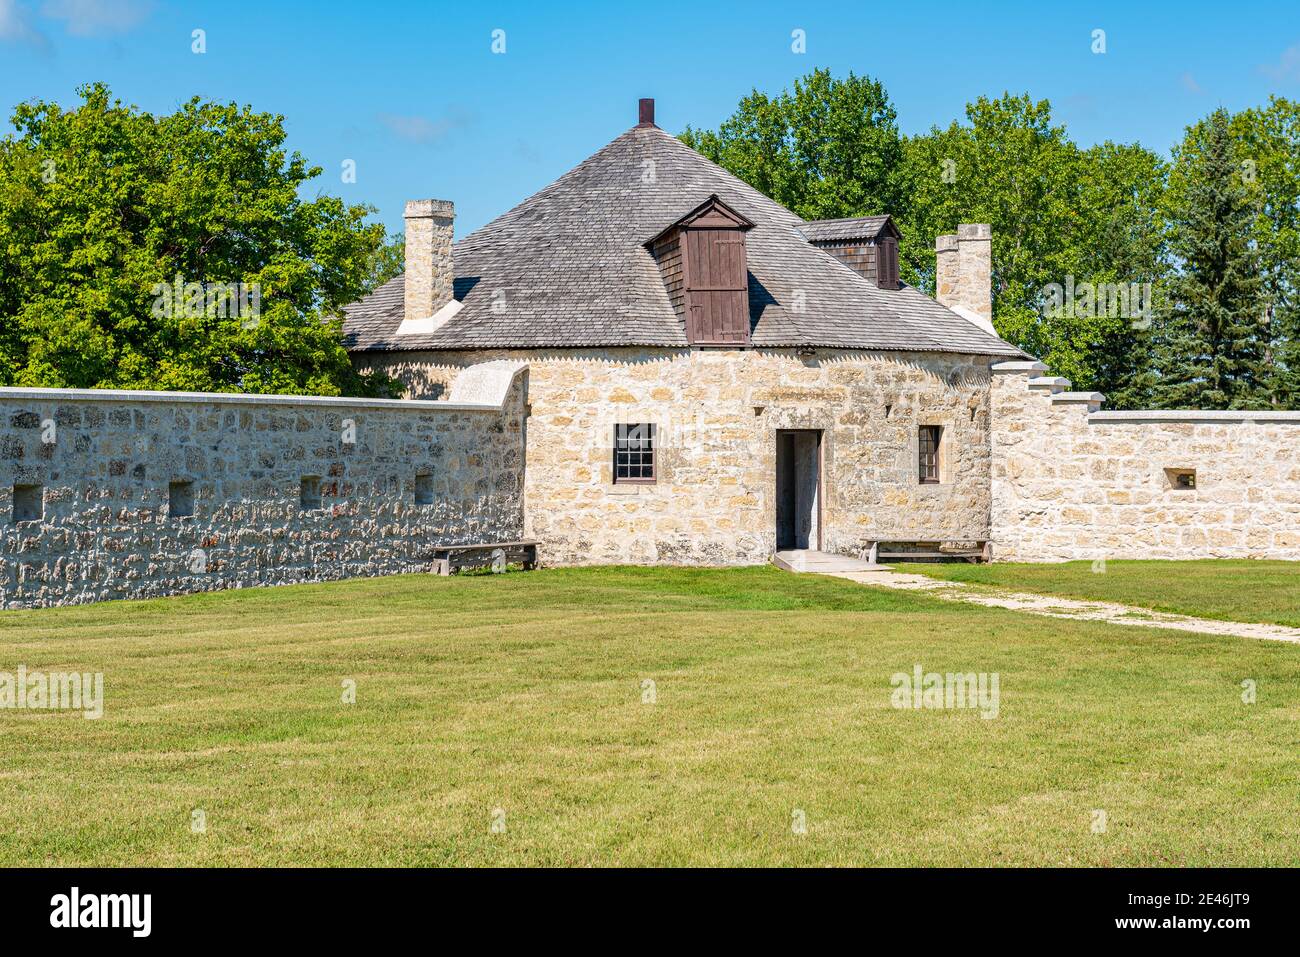 Building exteriors of the Lower Fort Garry National Historic Site established in 1831 the by the Hudson Bay Company. Saint-Andrews, Manitoba, Canada Stock Photo